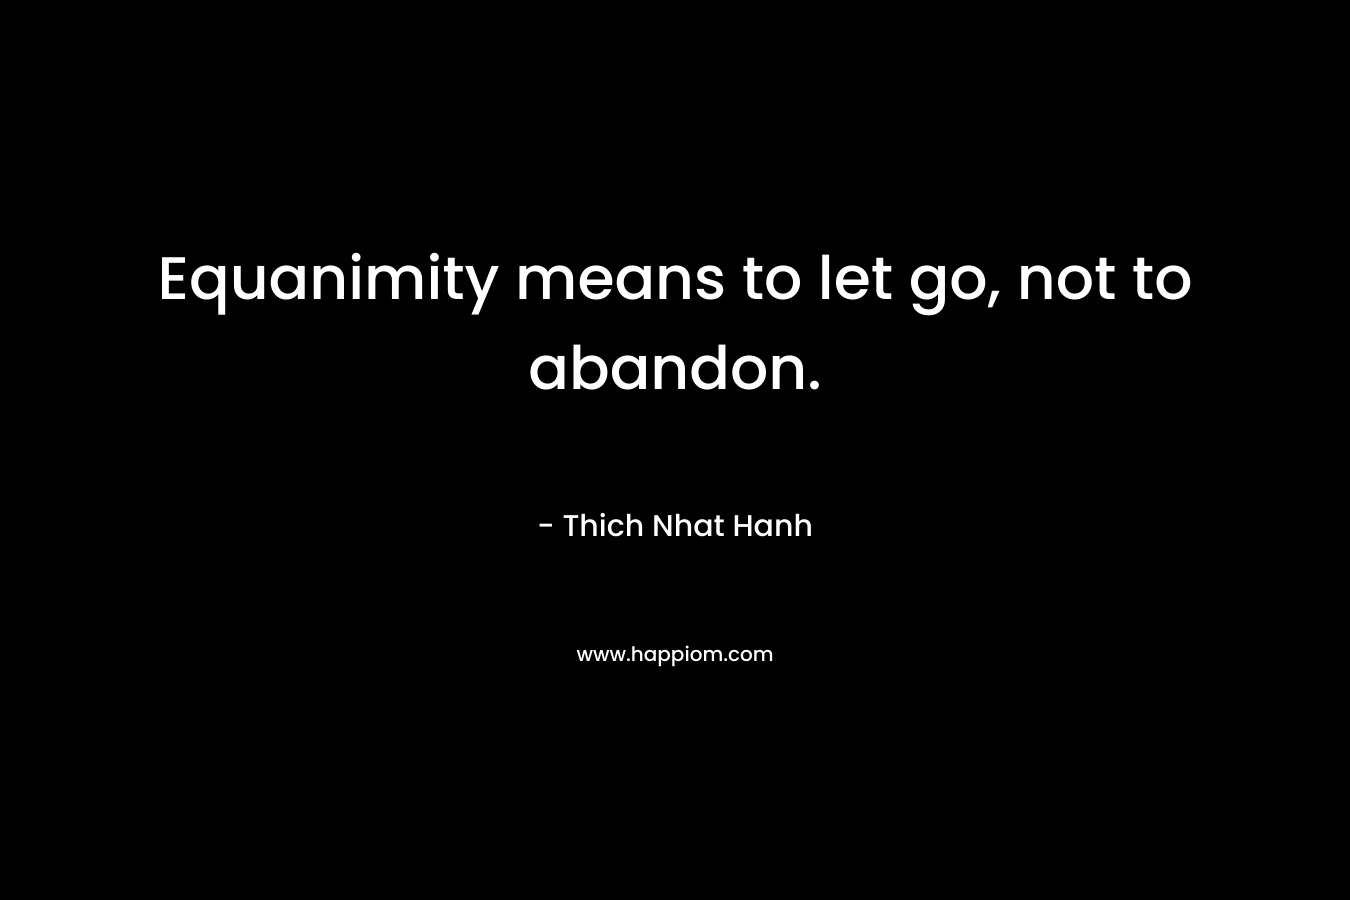 Equanimity means to let go, not to abandon. – Thich Nhat Hanh